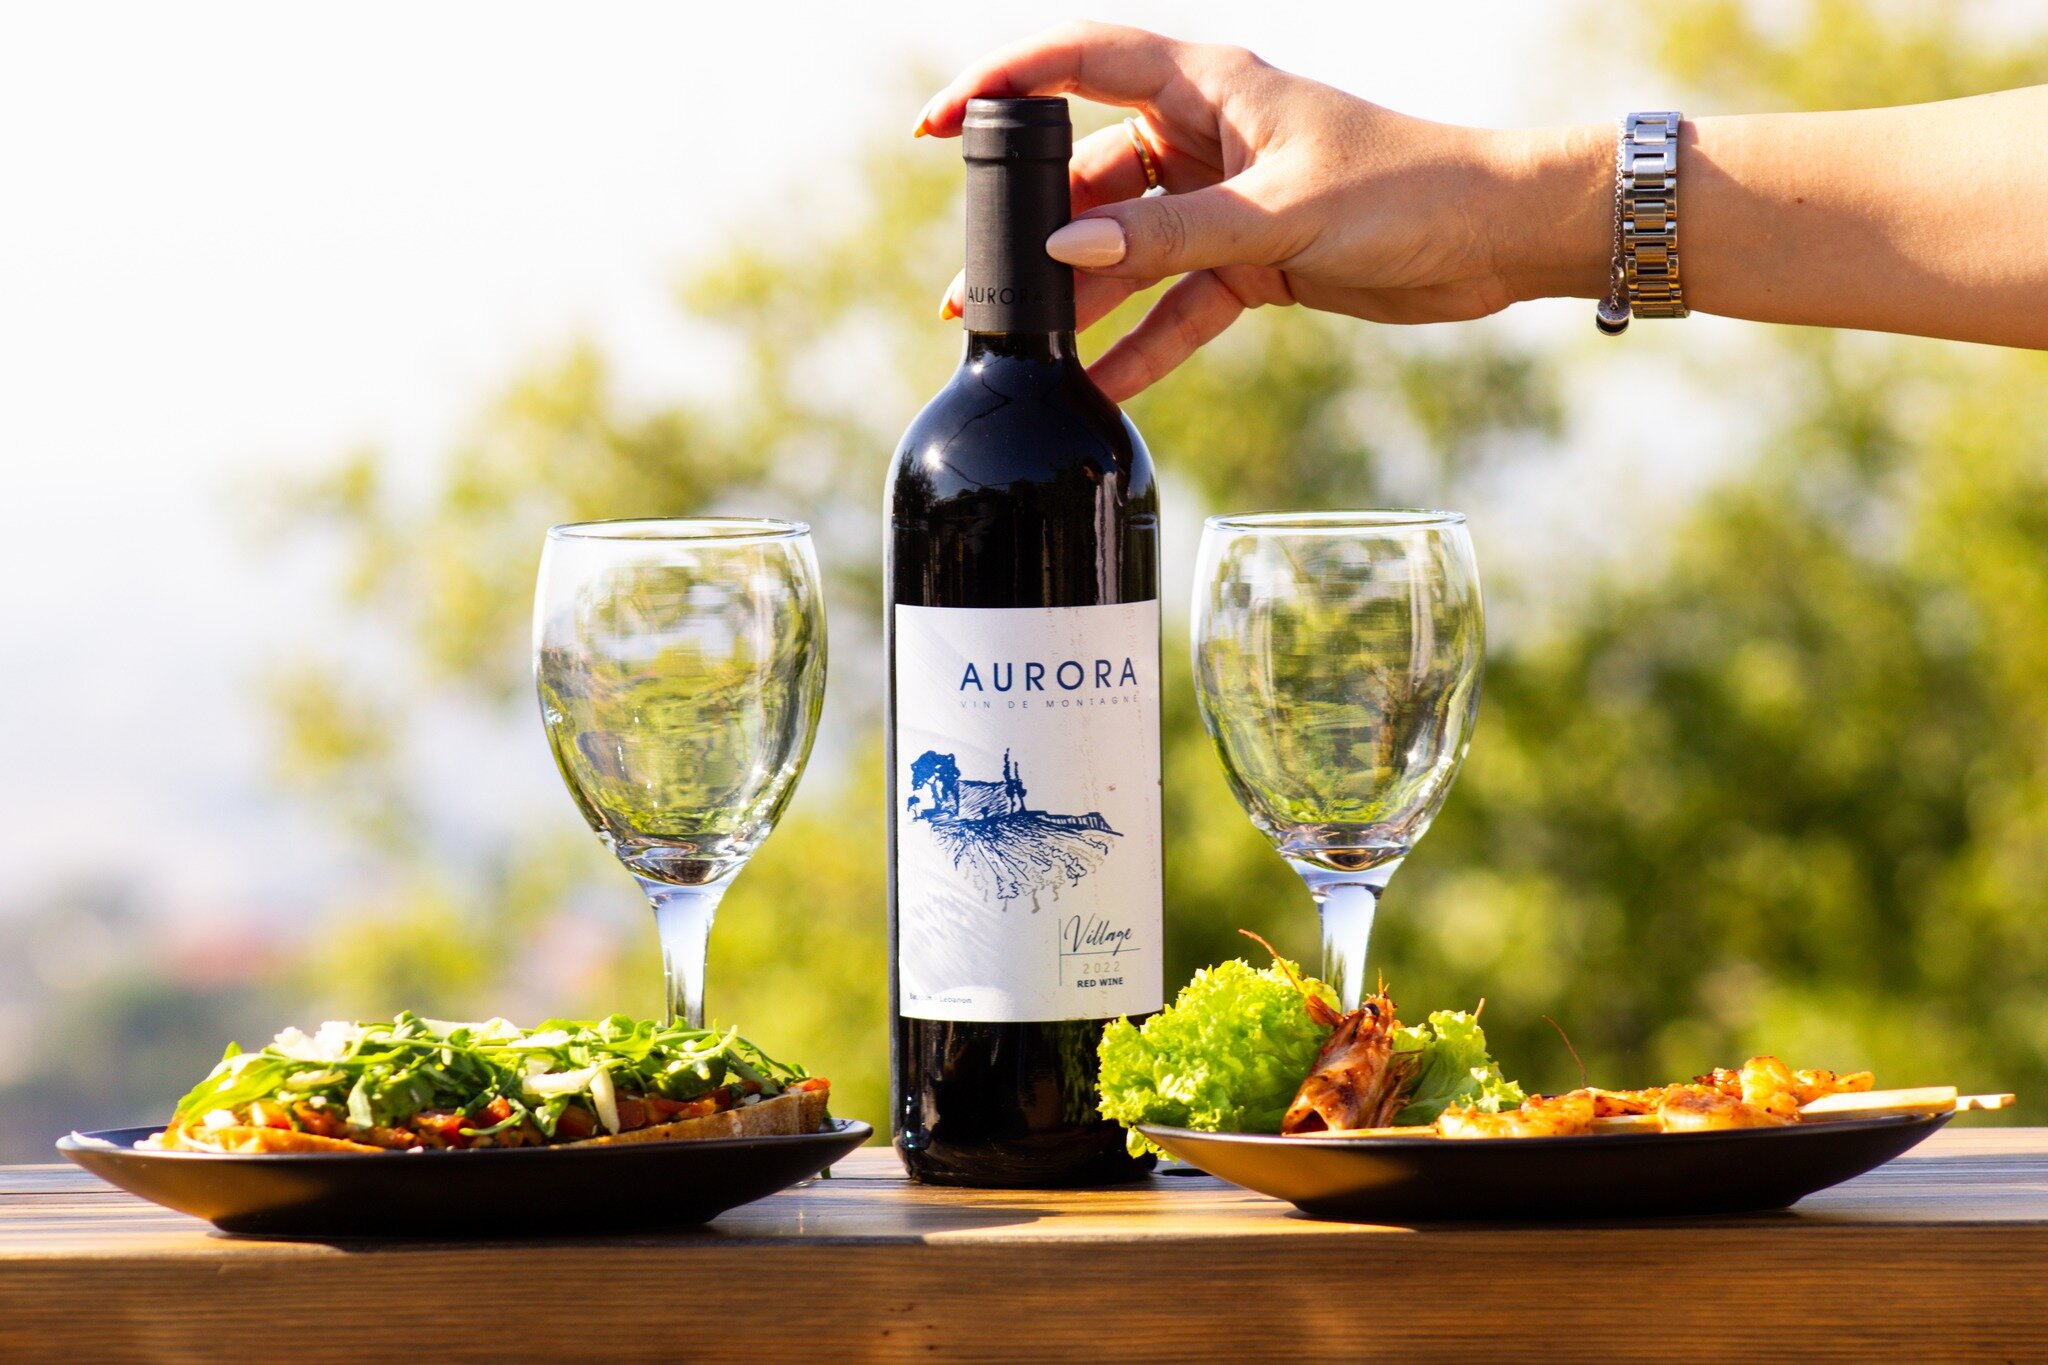 Guess what? you&rsquo;ll be able to try our newest Aurora Village which has yet to be released on the market! 
 #wine #winetime #winelover #wineoclock #winetasting #lebanesewines